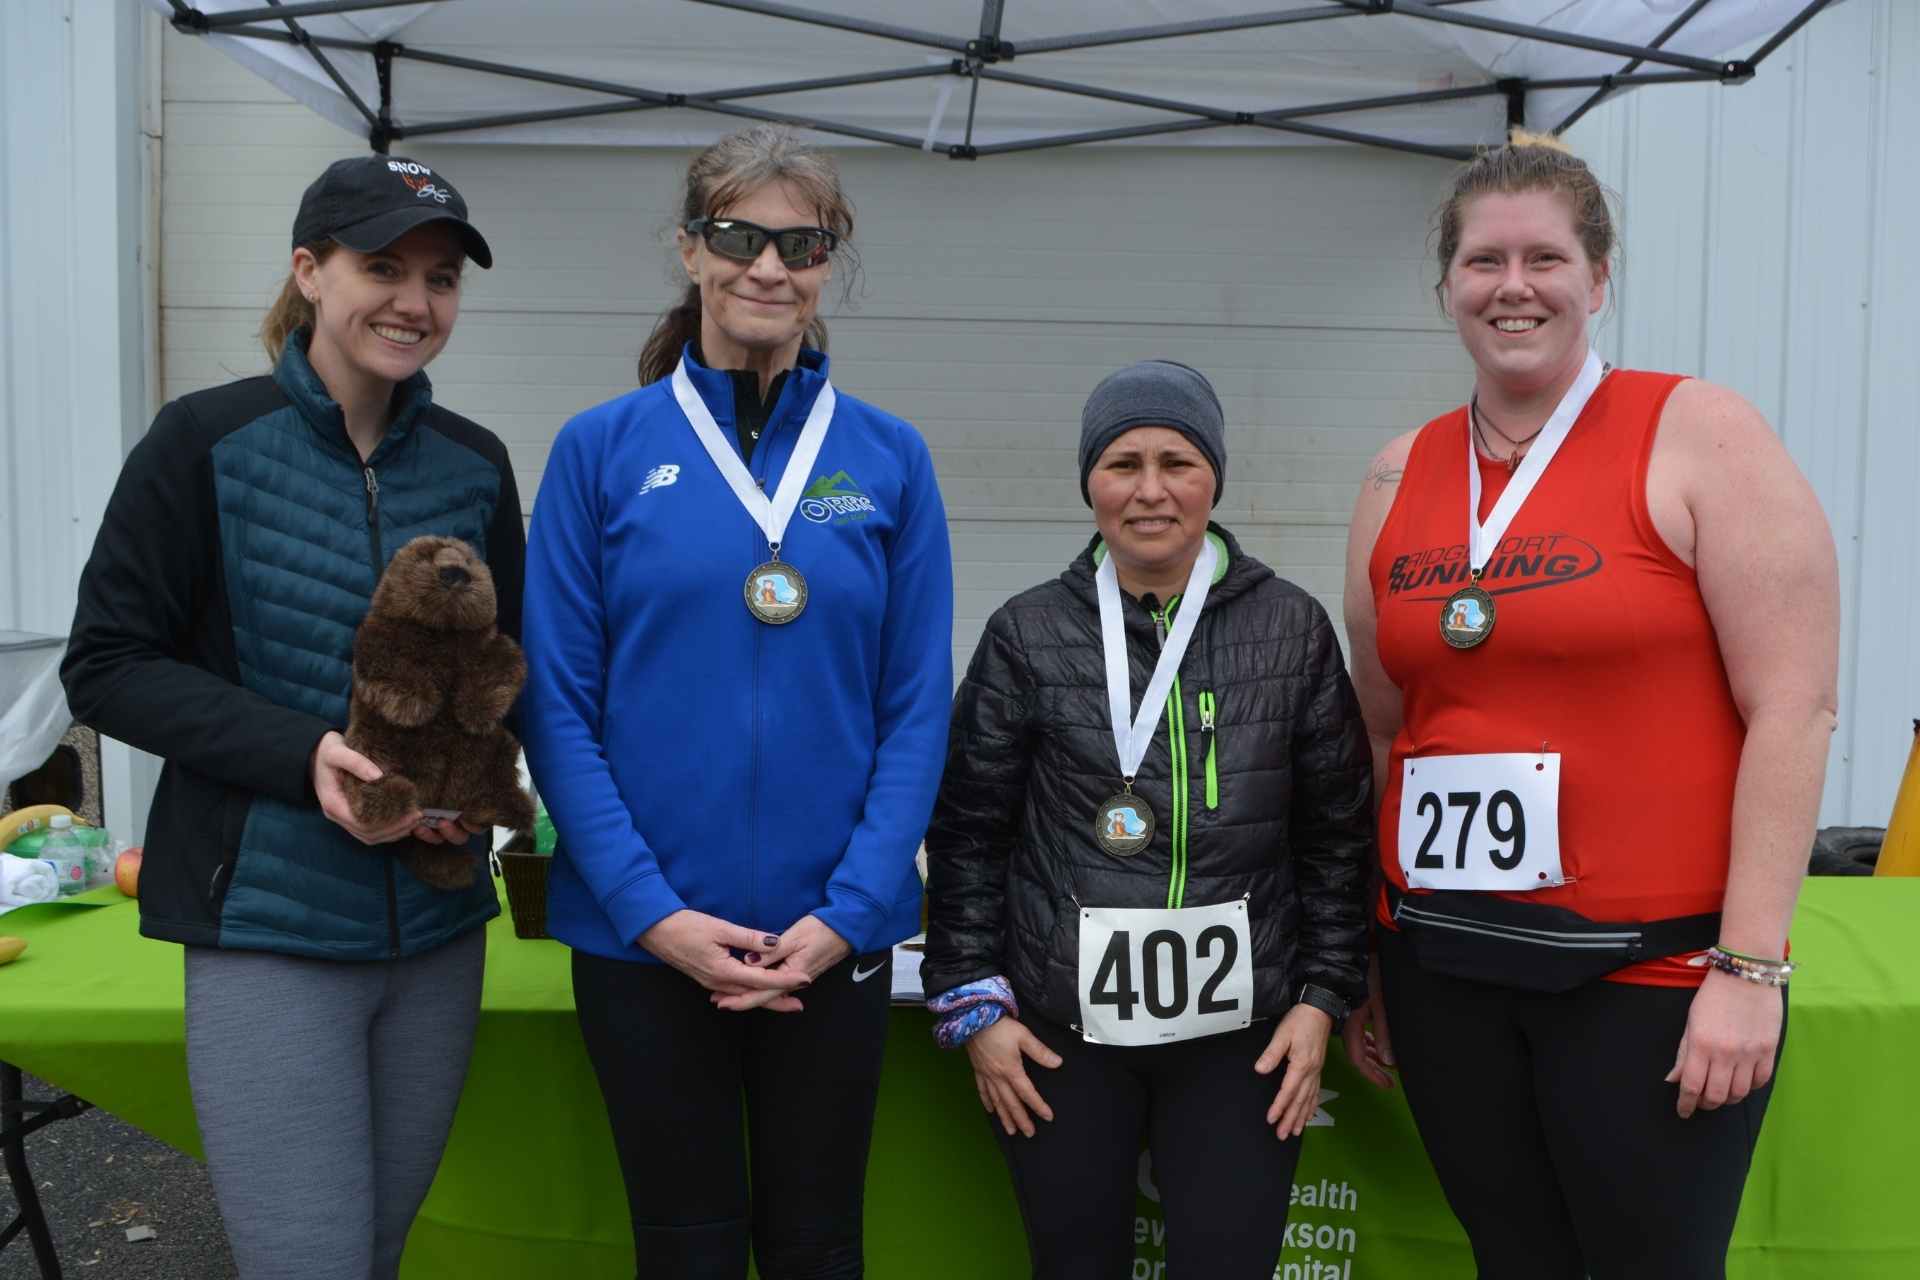 The top three female racers at the recent Mon Health Stonewall Jackson Memorial Hospital 5K were awarded medals by Physical Therapy intern Katie Ruhstaller. Pictured left to right are: Ruhstaller, first place winner Lyn Miksell, second place Yamileth Setterlund, and third place Tasha Coulthart.